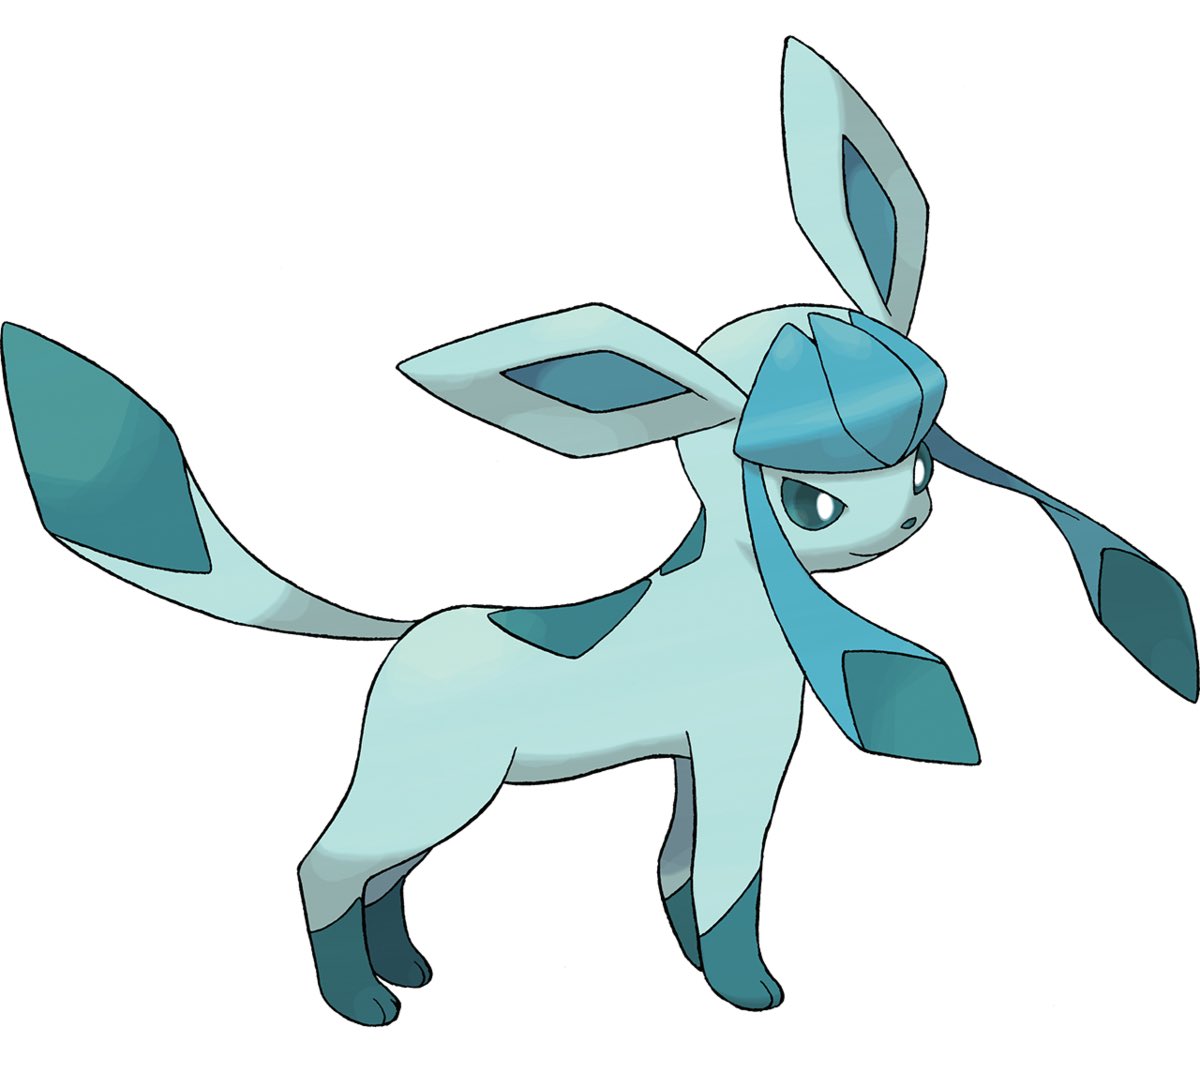 25. For those curious, Glaceon is my favourite Pokémon. 